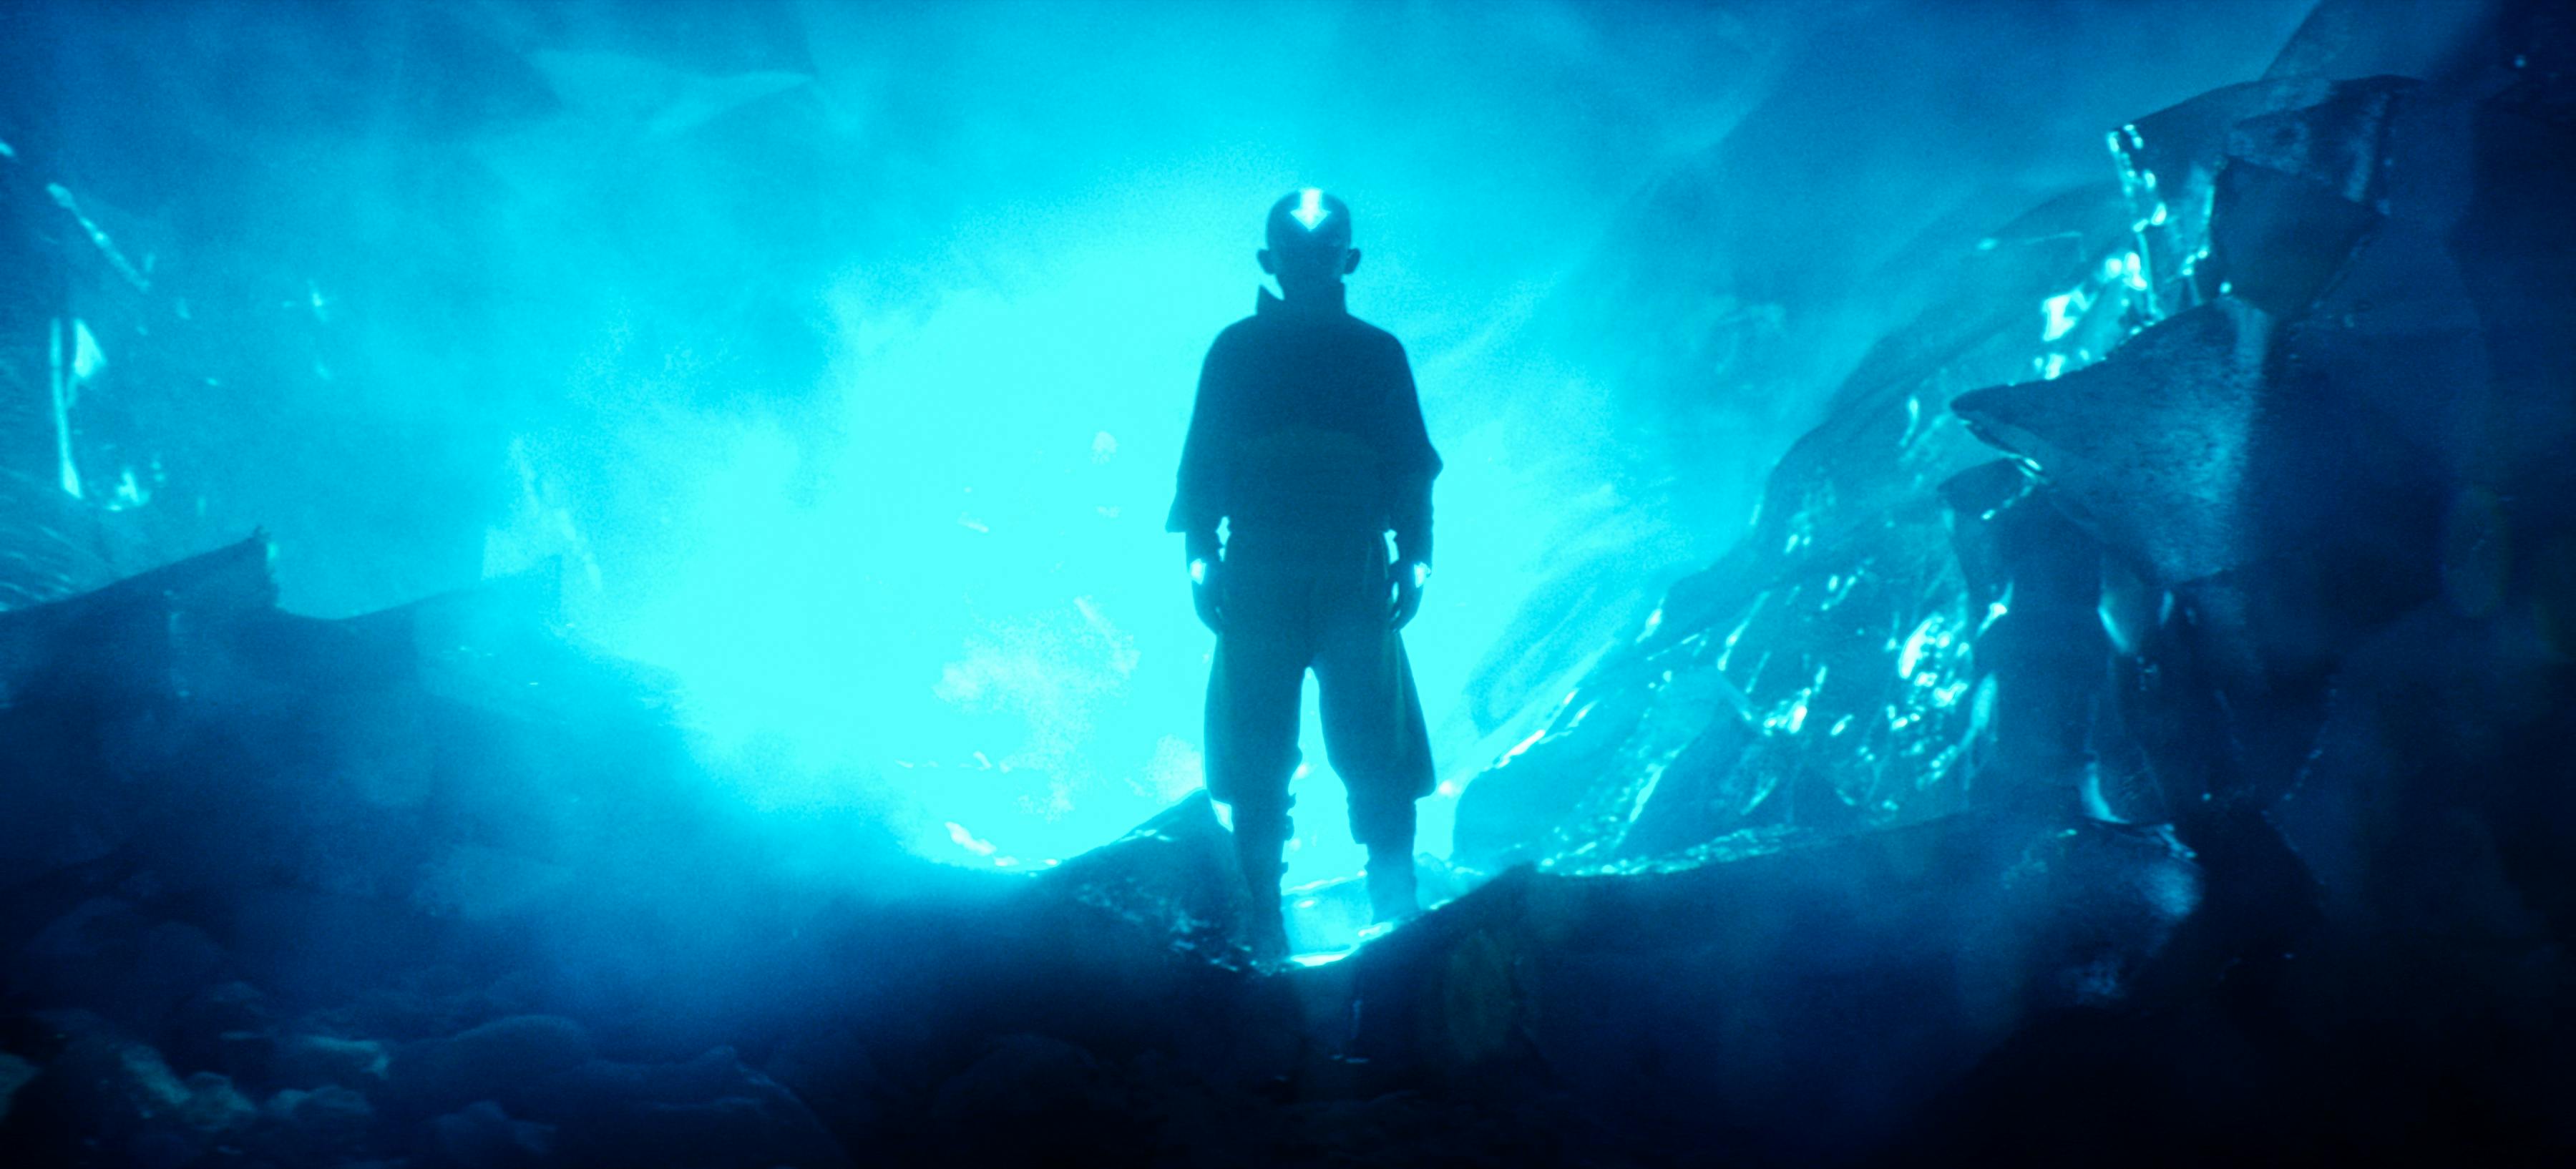 Aang (Gordon Cormier) stands atop rolling waves, backlit by neon blue light. 